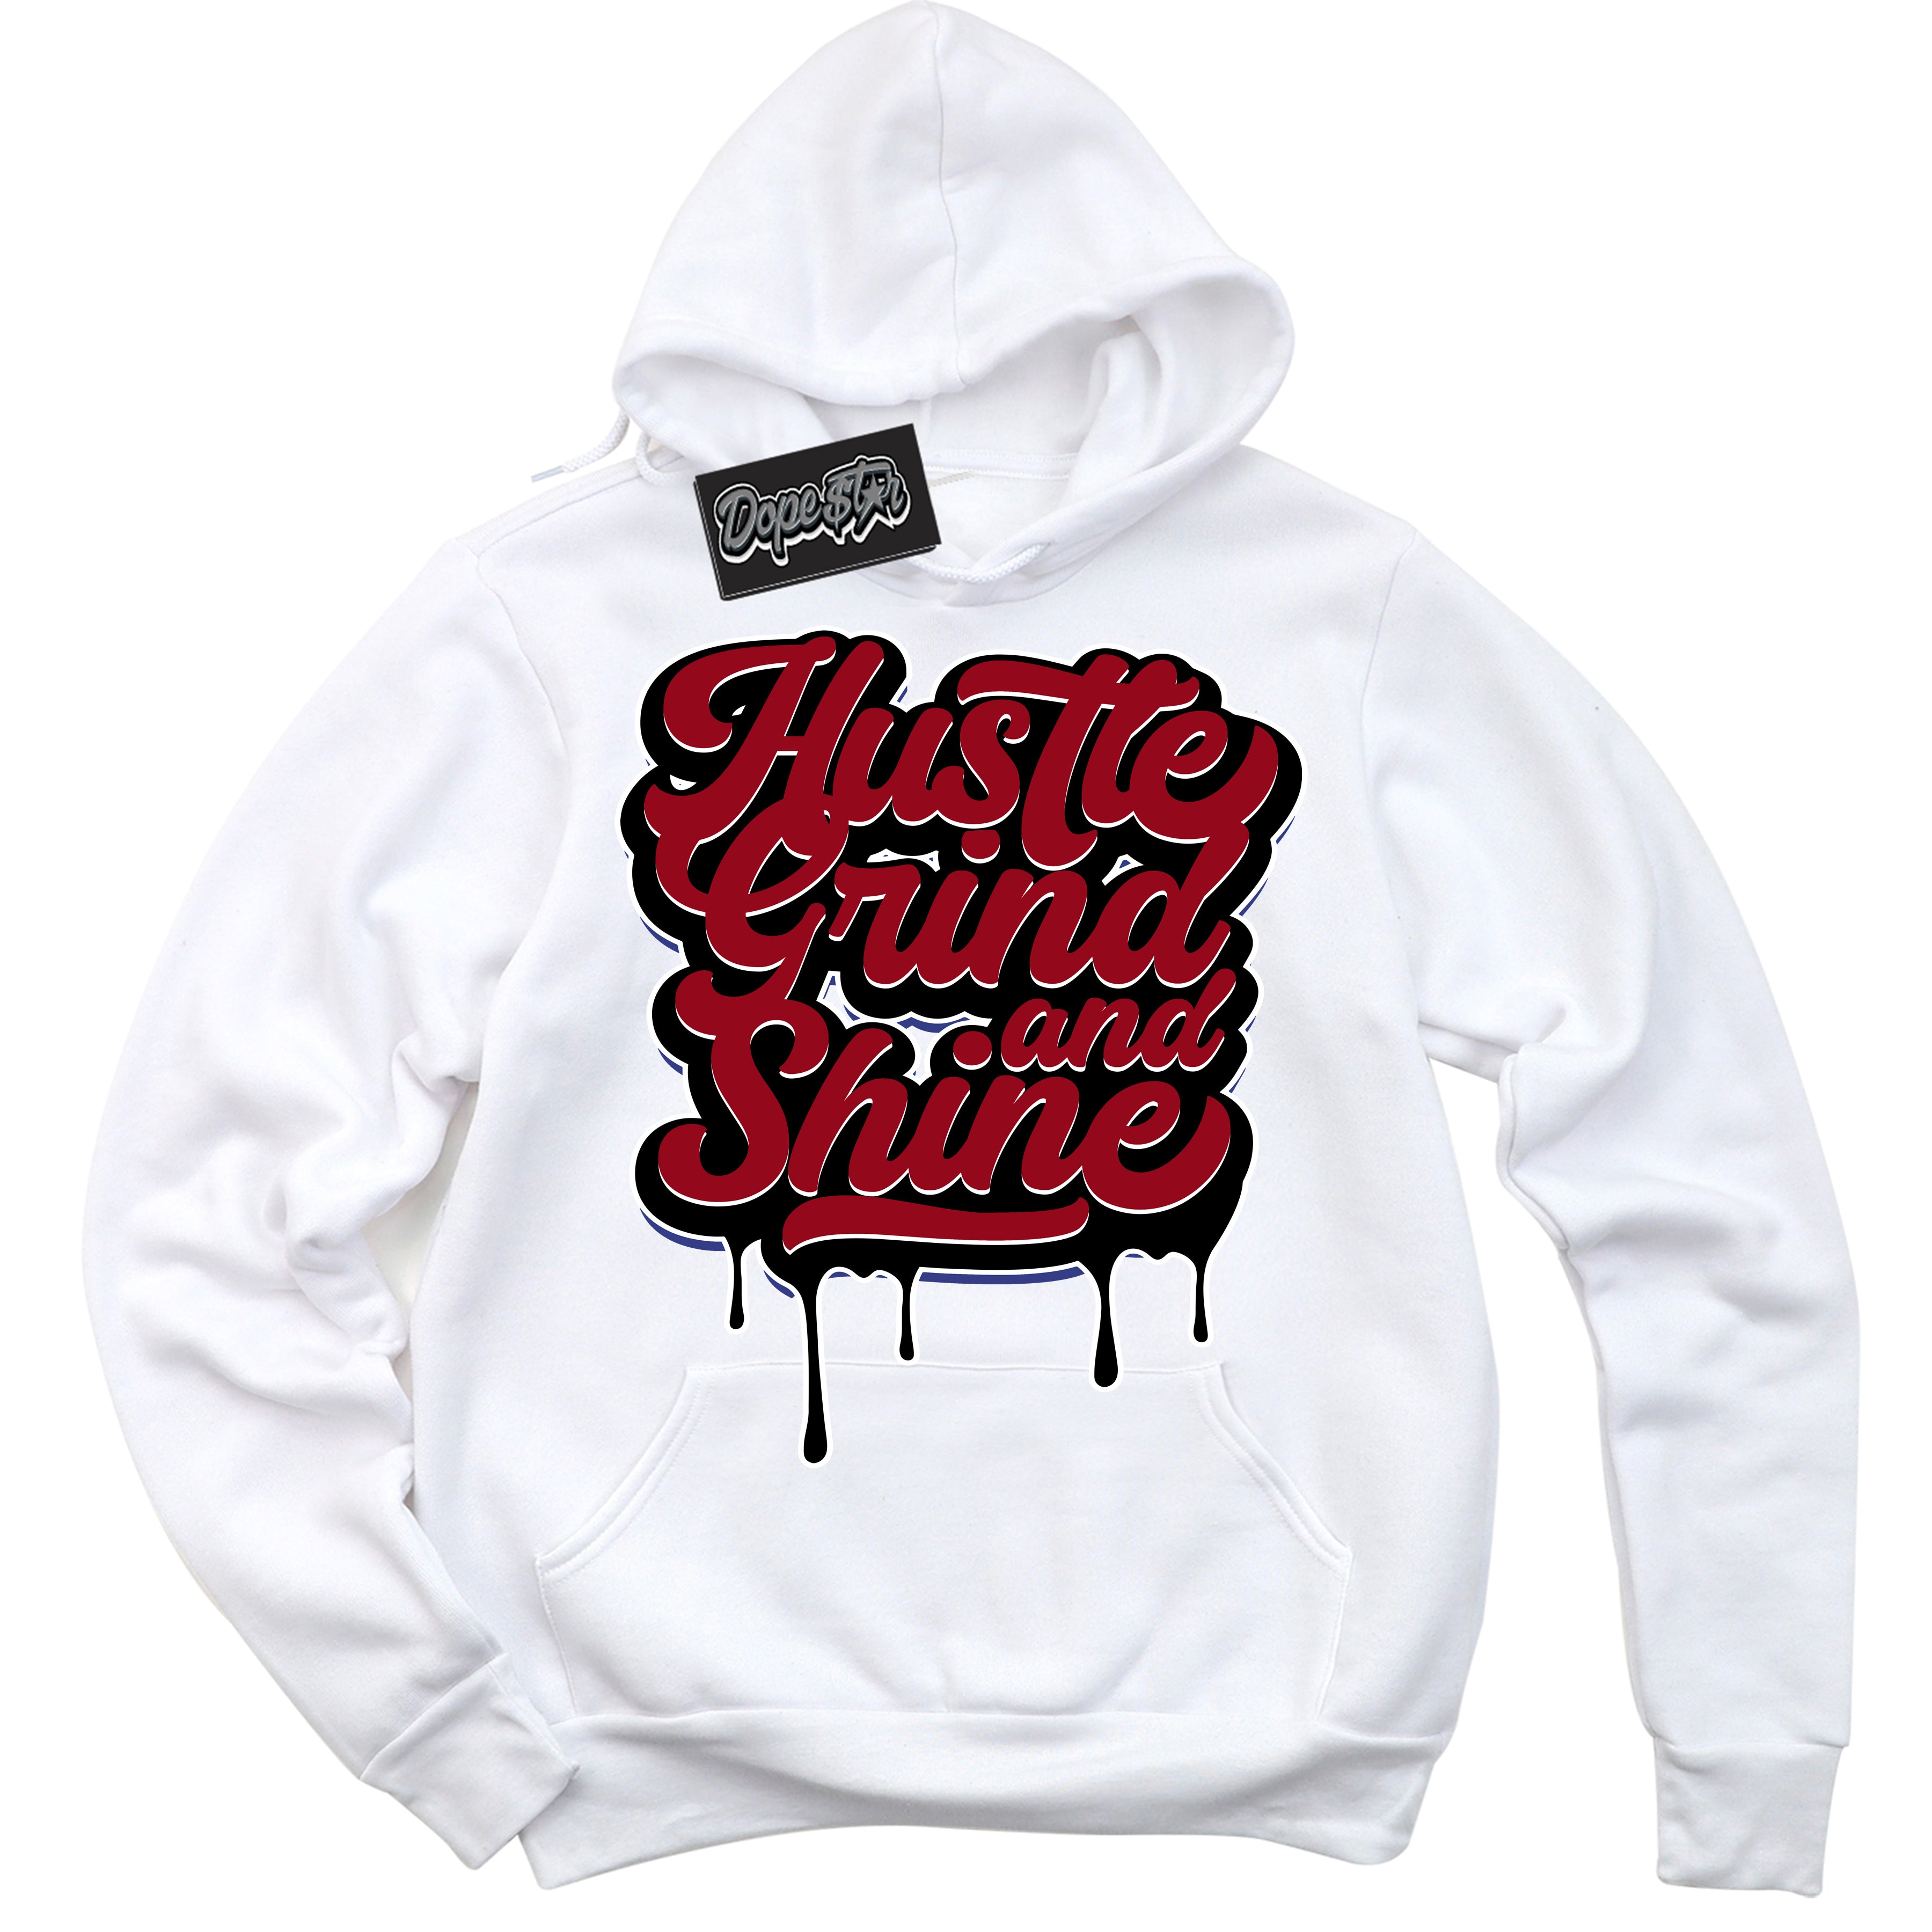 Cool White Hoodie with “ Hustle Grind And Shine ”  design that Perfectly Matches Playoffs 8s Sneakers.